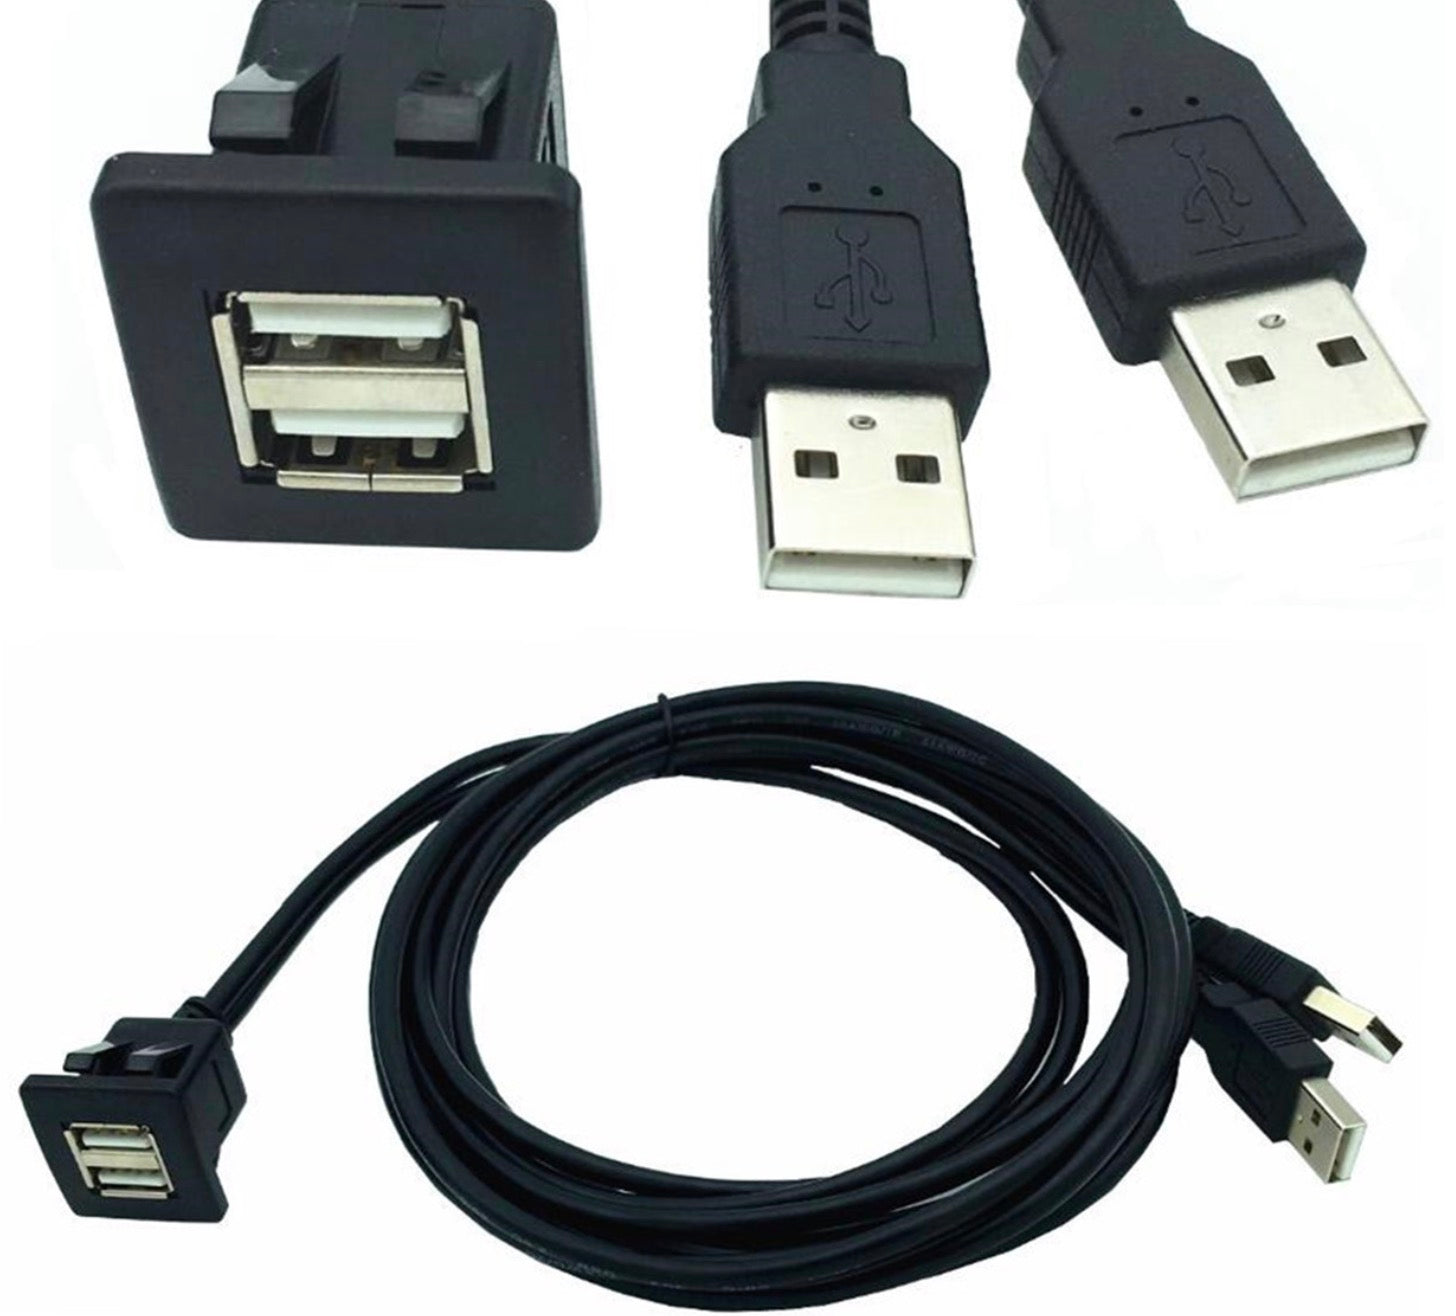 Dual USB 2.0 Type A Male to Female Flush Mount Extension Dash Cable